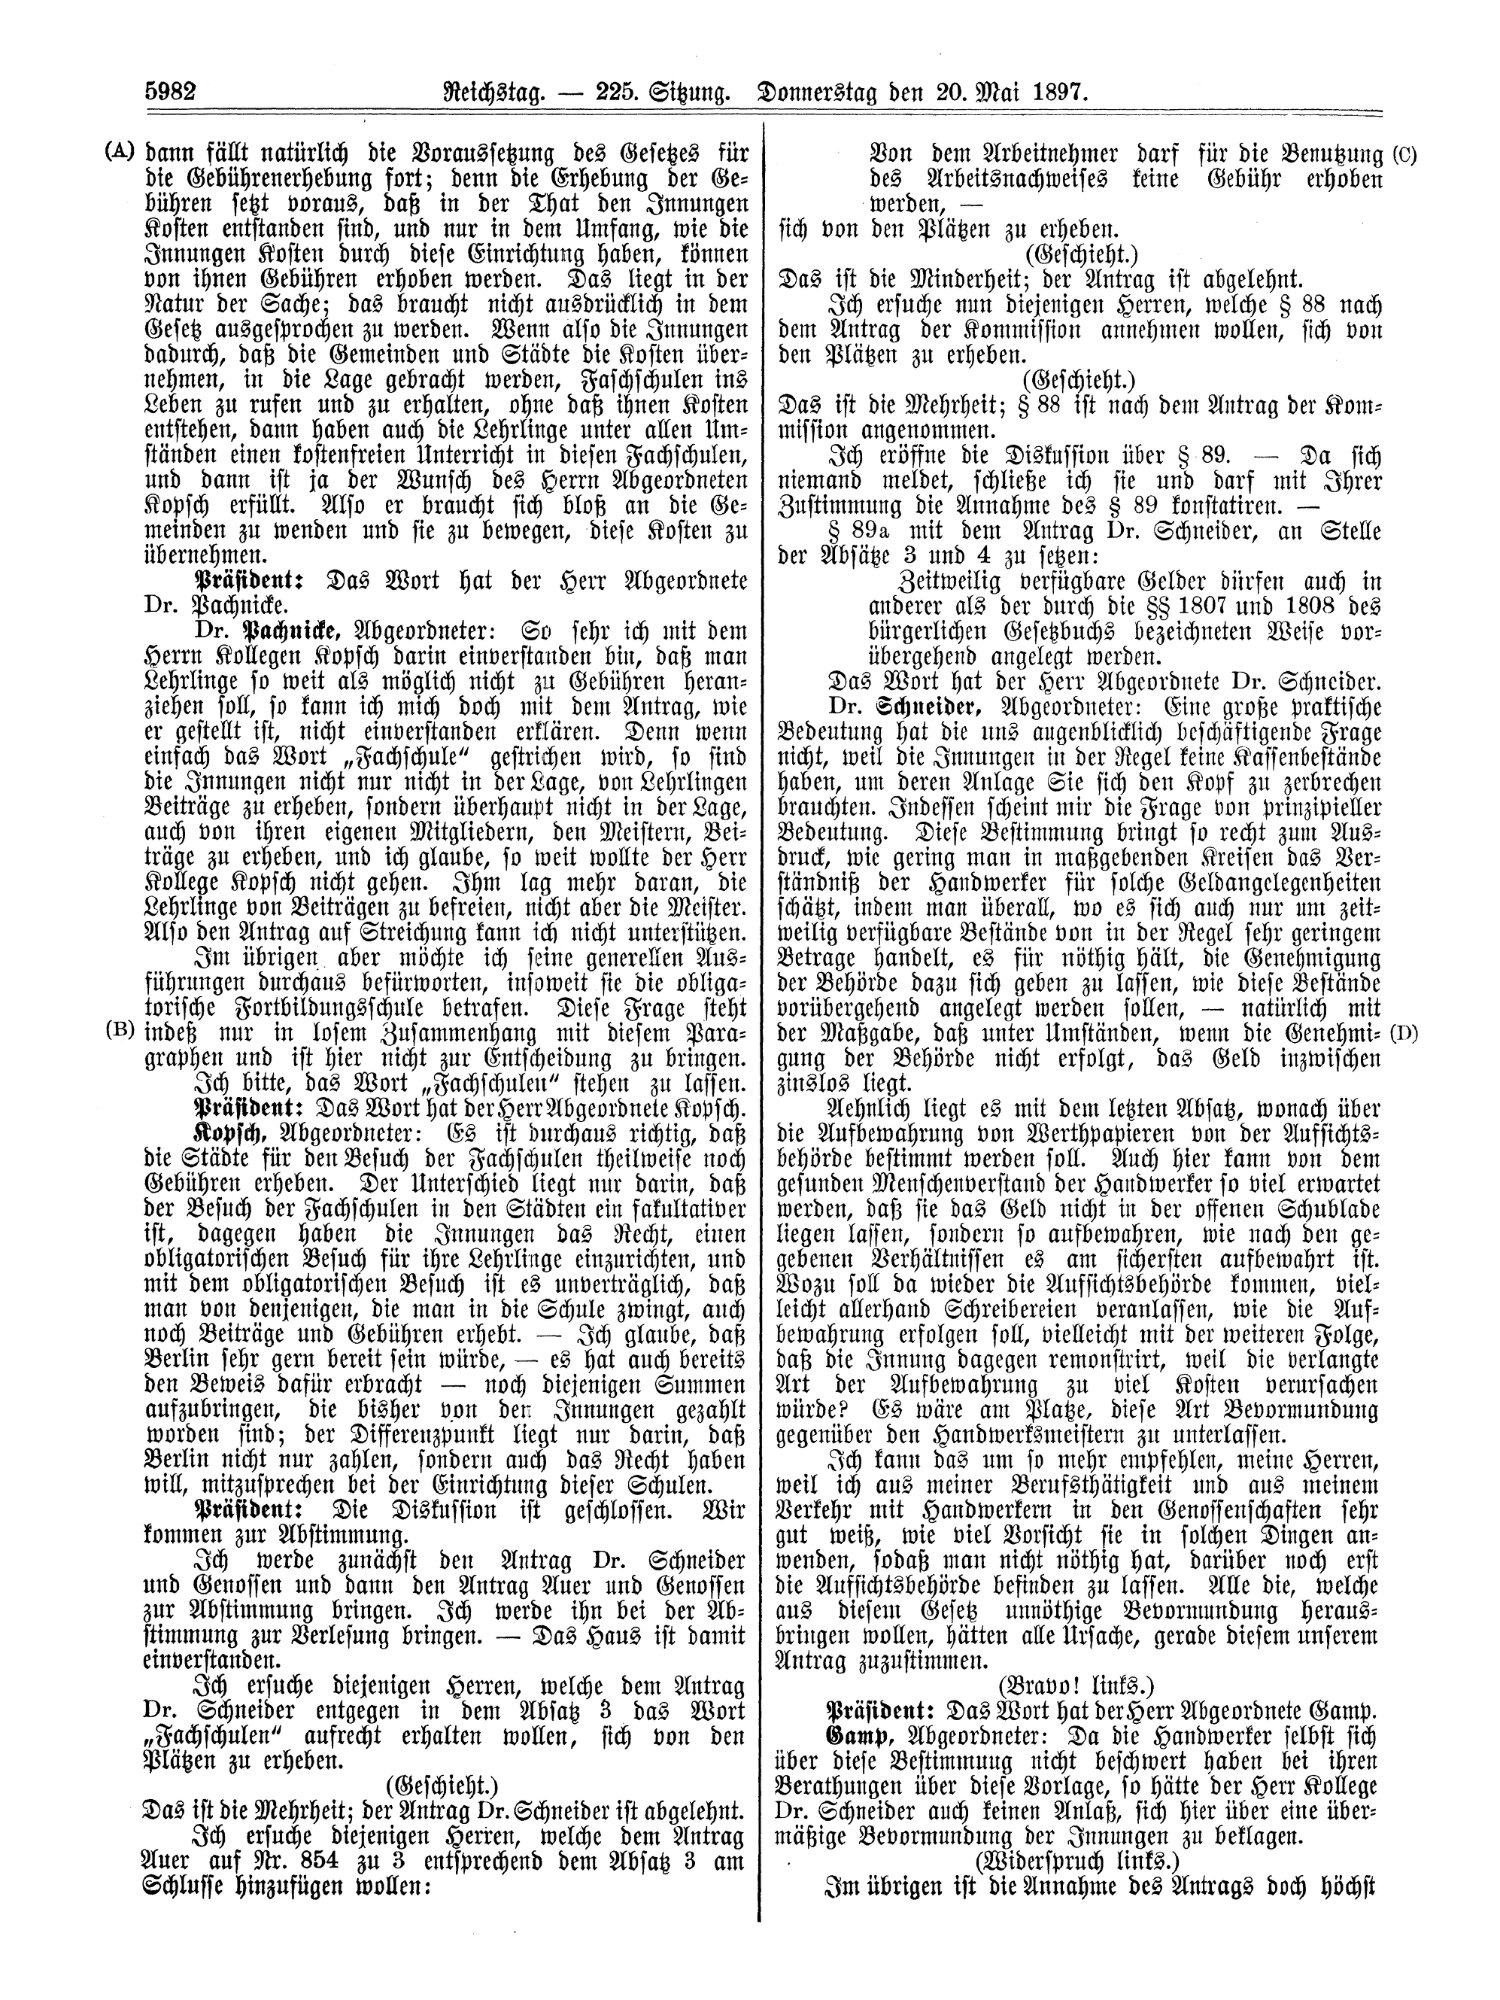 Scan of page 5982